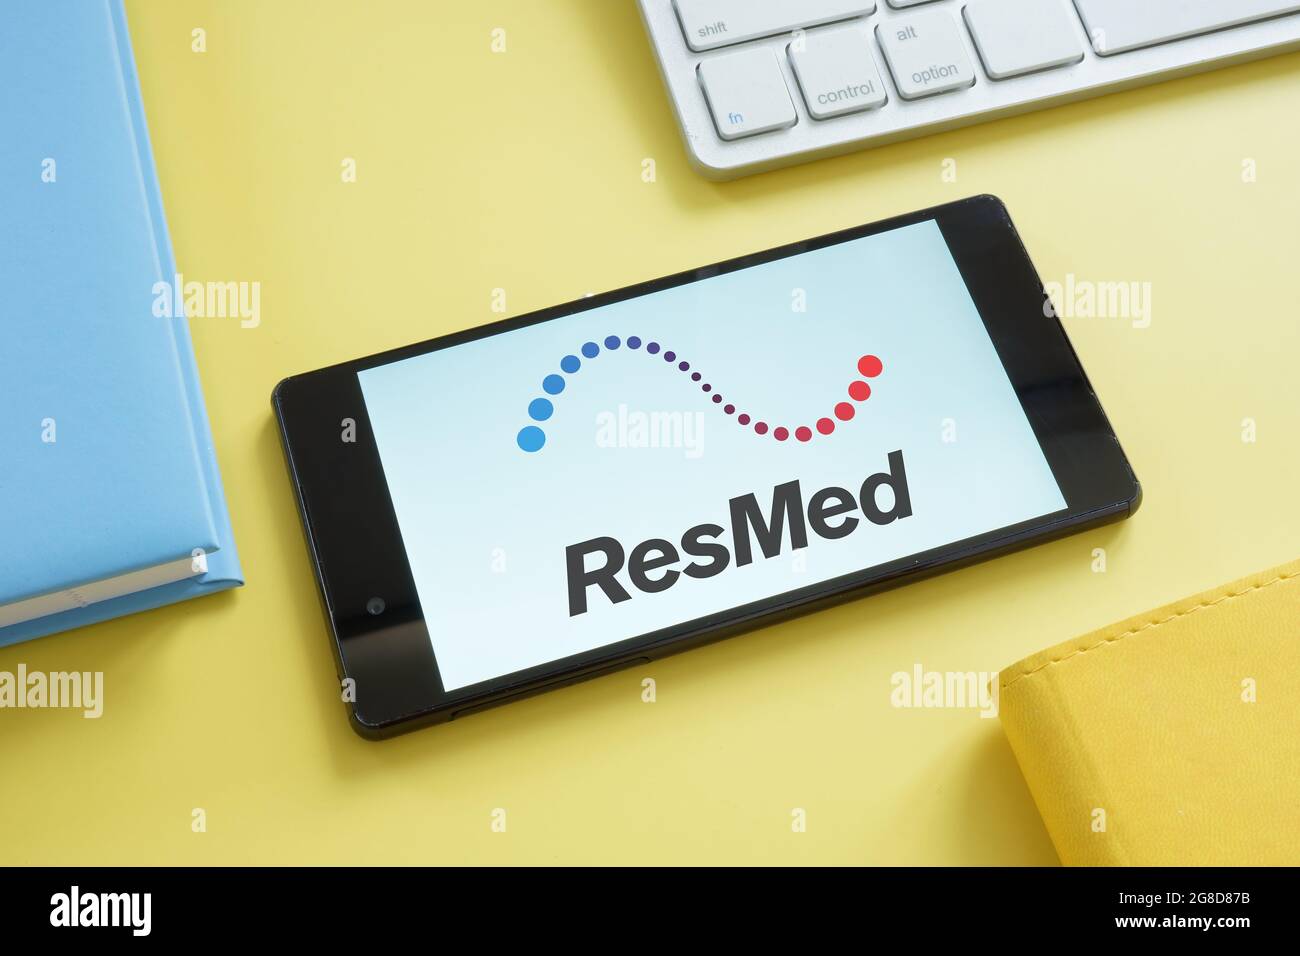 KYIV, UKRAINE - June 30, 2021. ResMed logo on the screen and tablets. Stock Photo